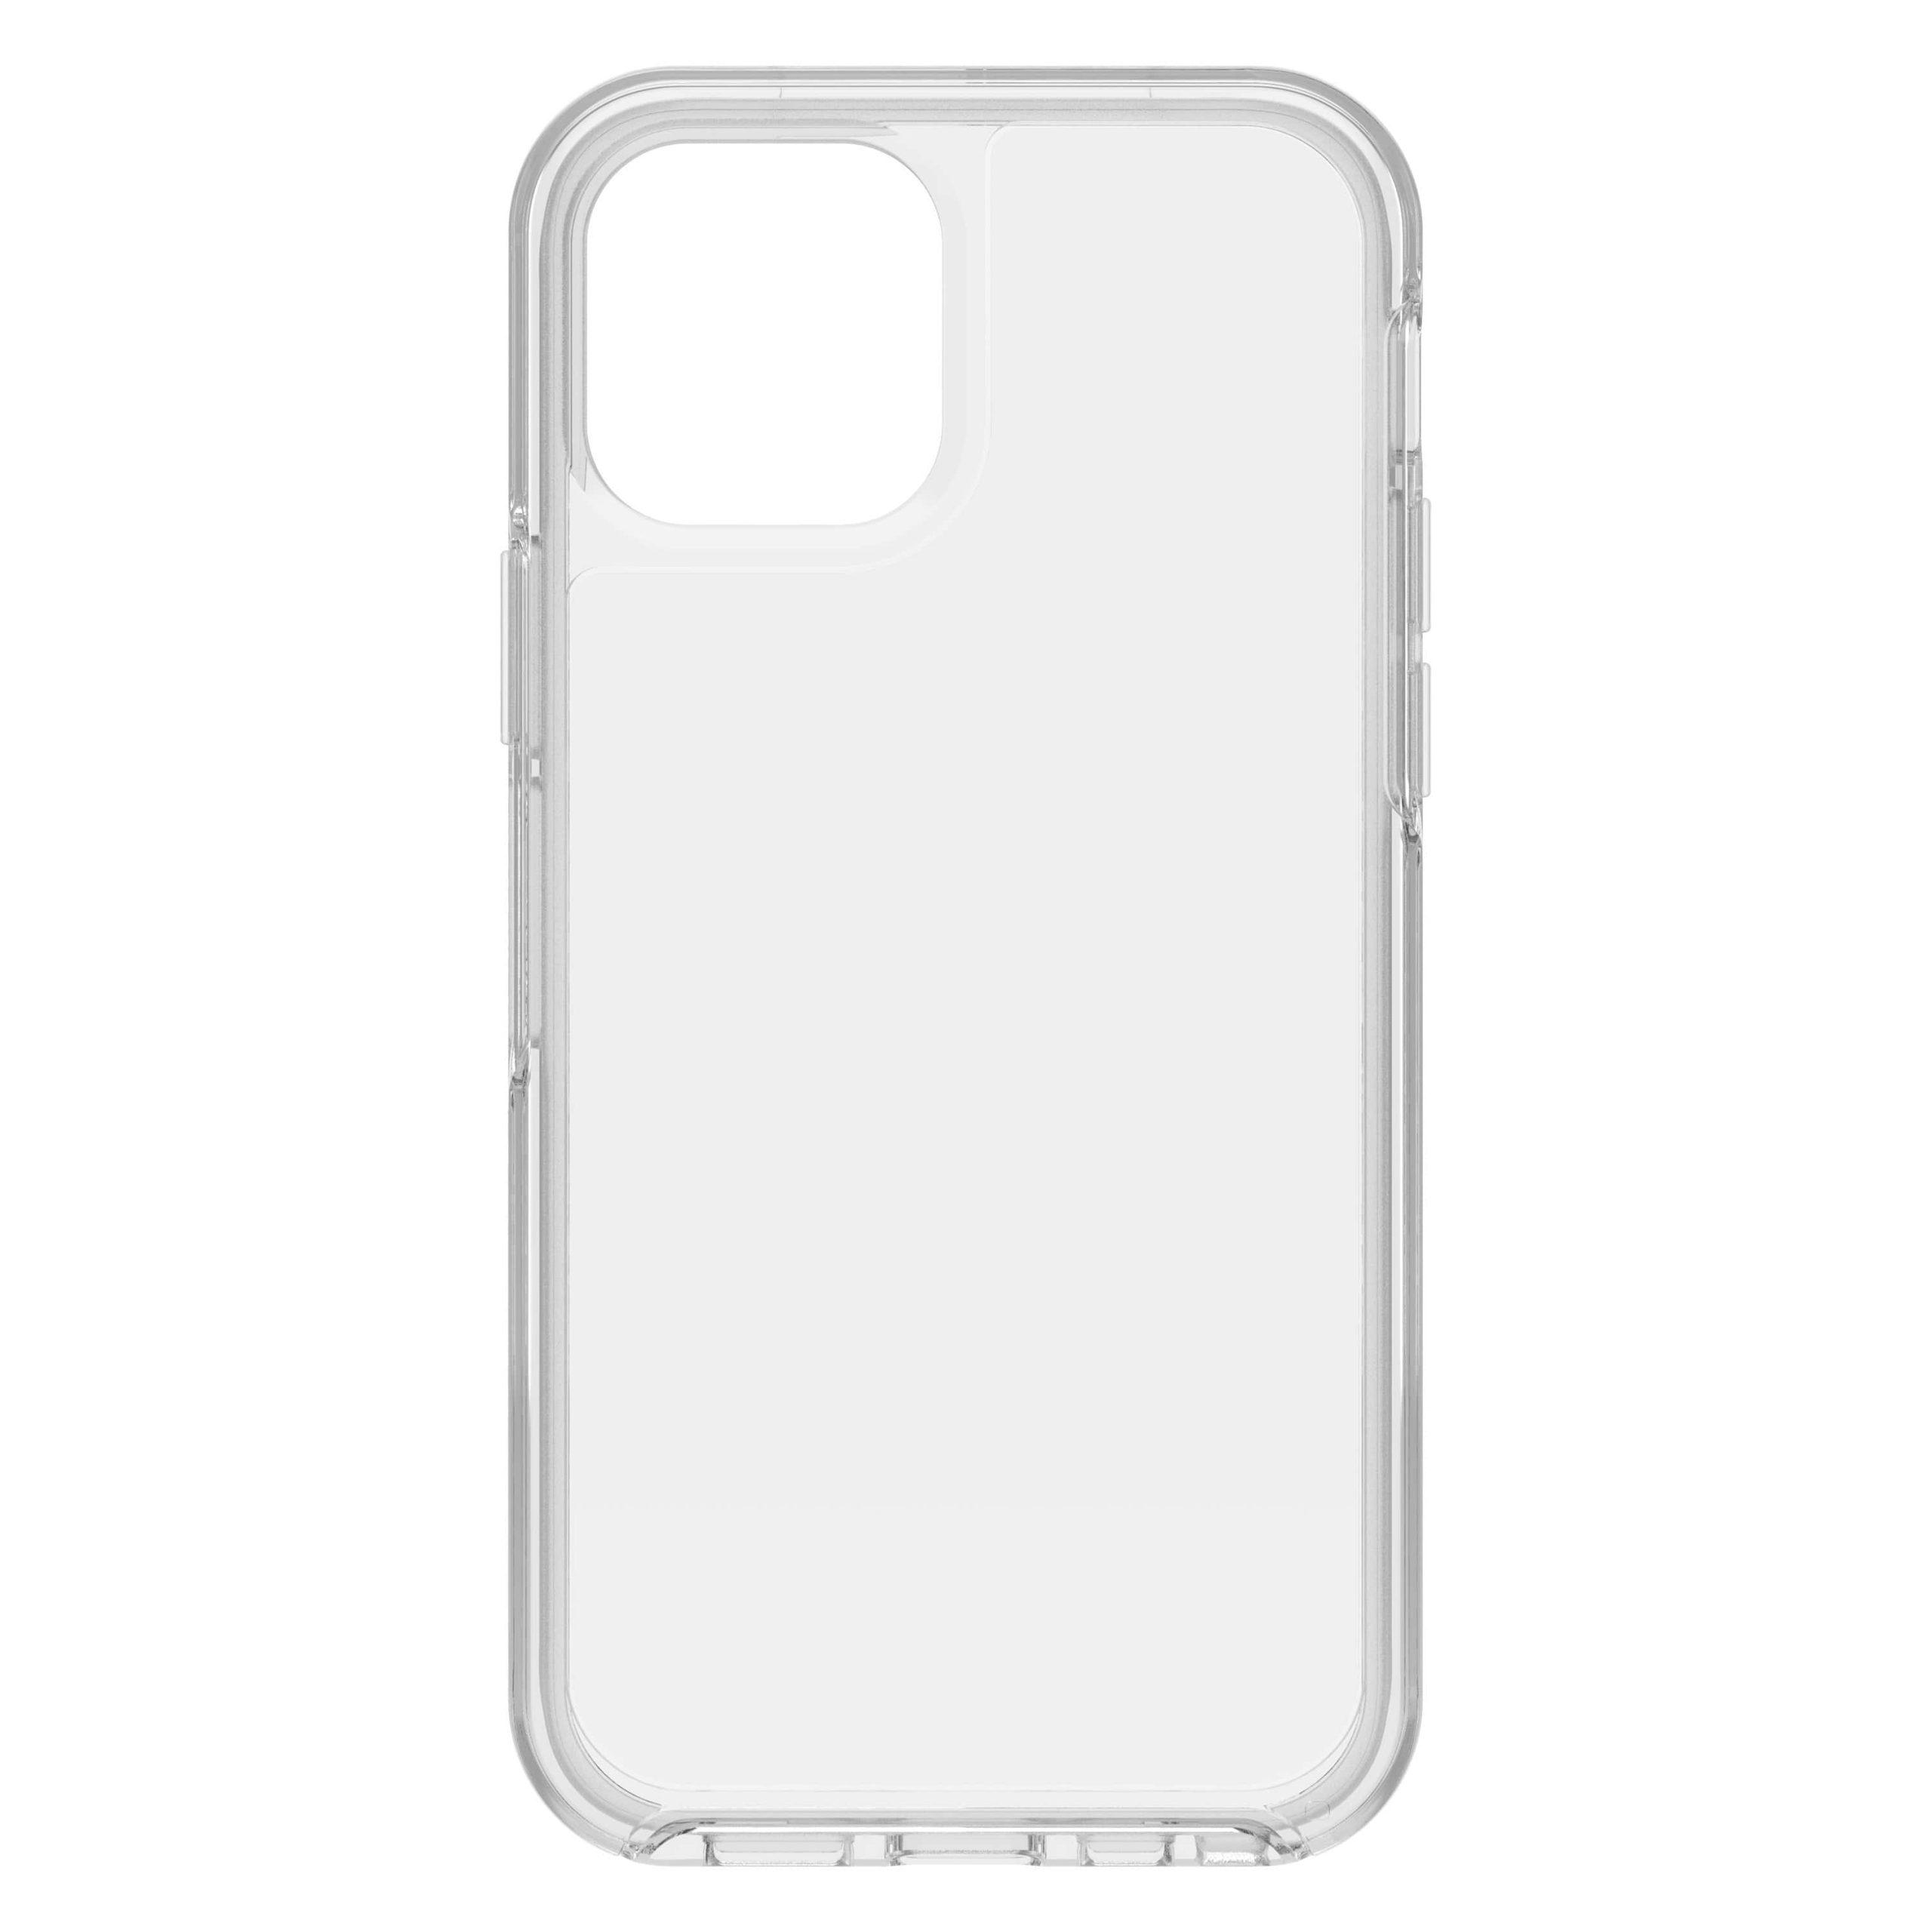 otterbox apple iphone 12 12 pro symmetry clear case slim and lightweight cover w military grade drop protection wireless charging compatible clear